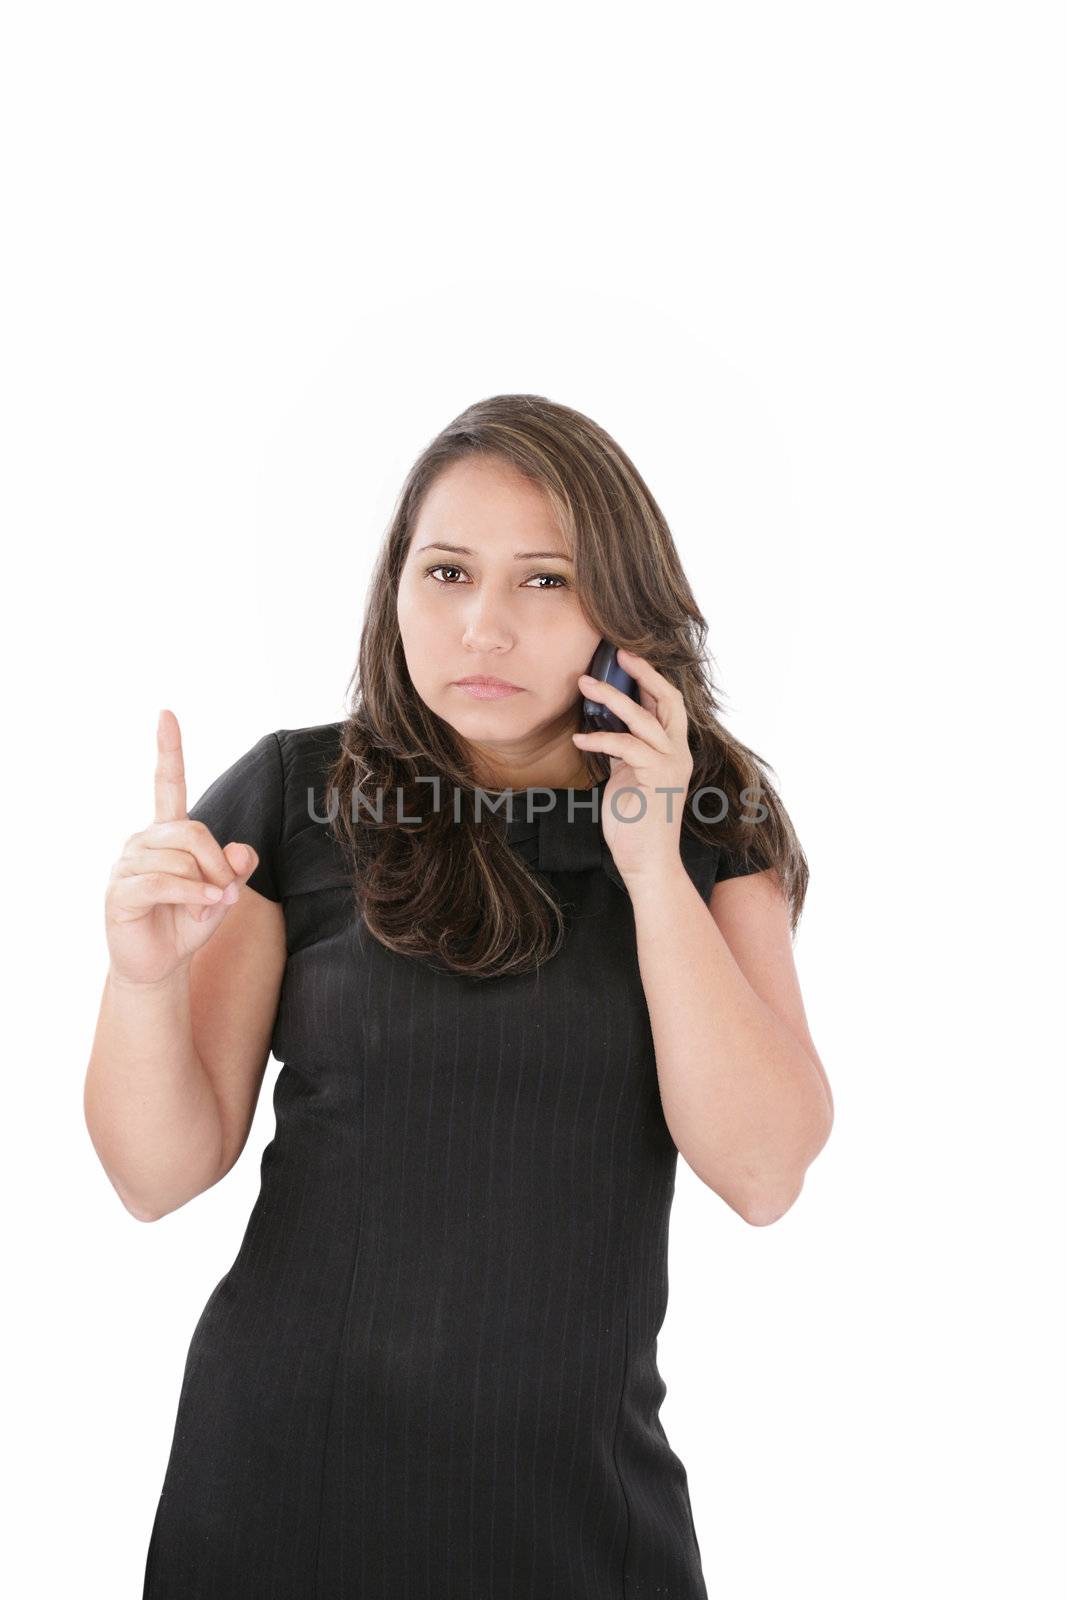 a woman with a serious expression on her face holding her phone by dacasdo